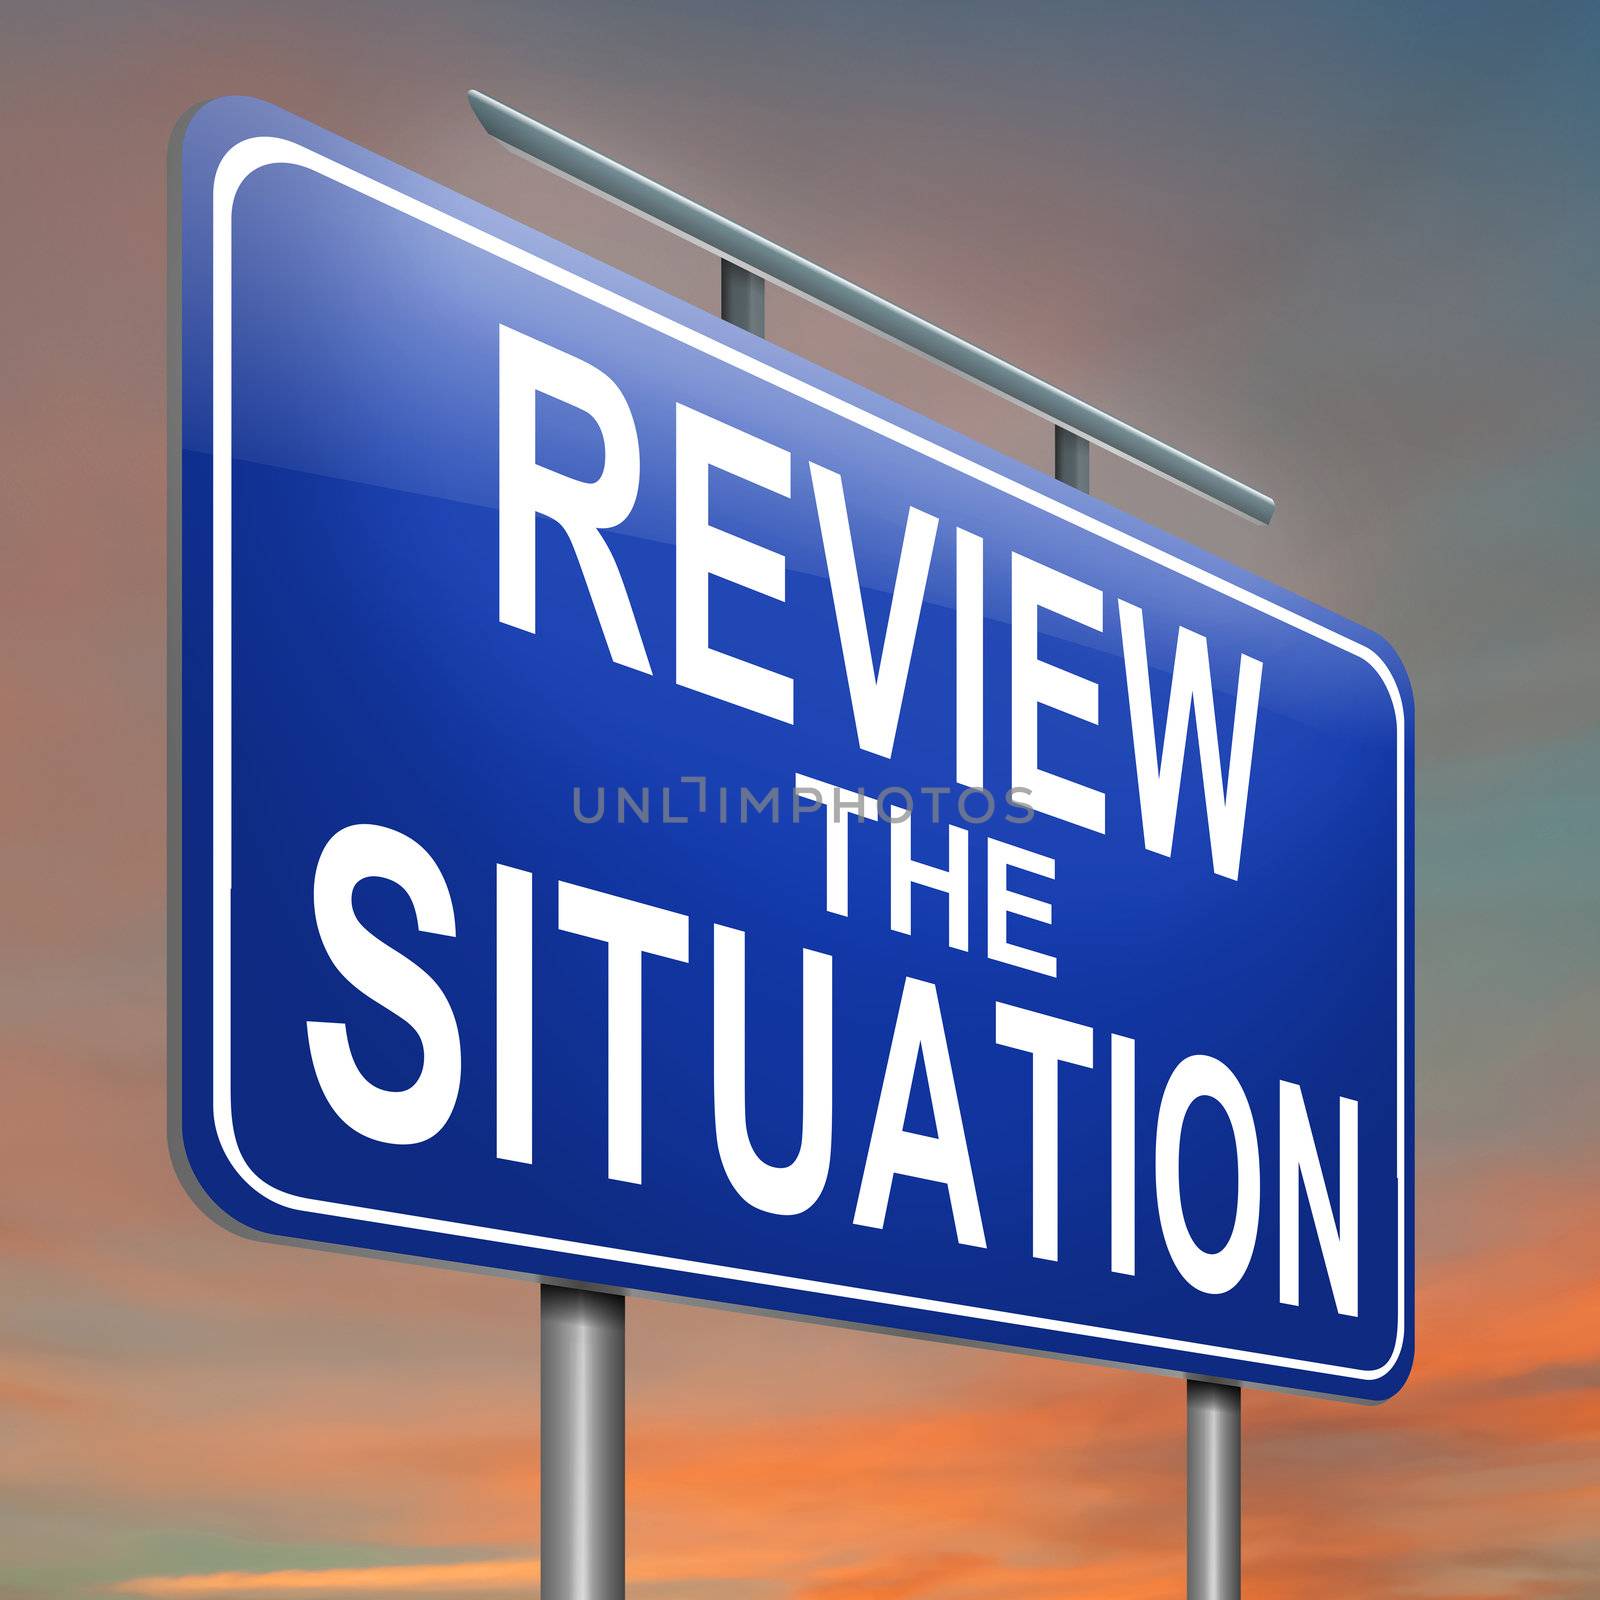 Illustration depicting a roadsign with a review the situation concept. Sky background.